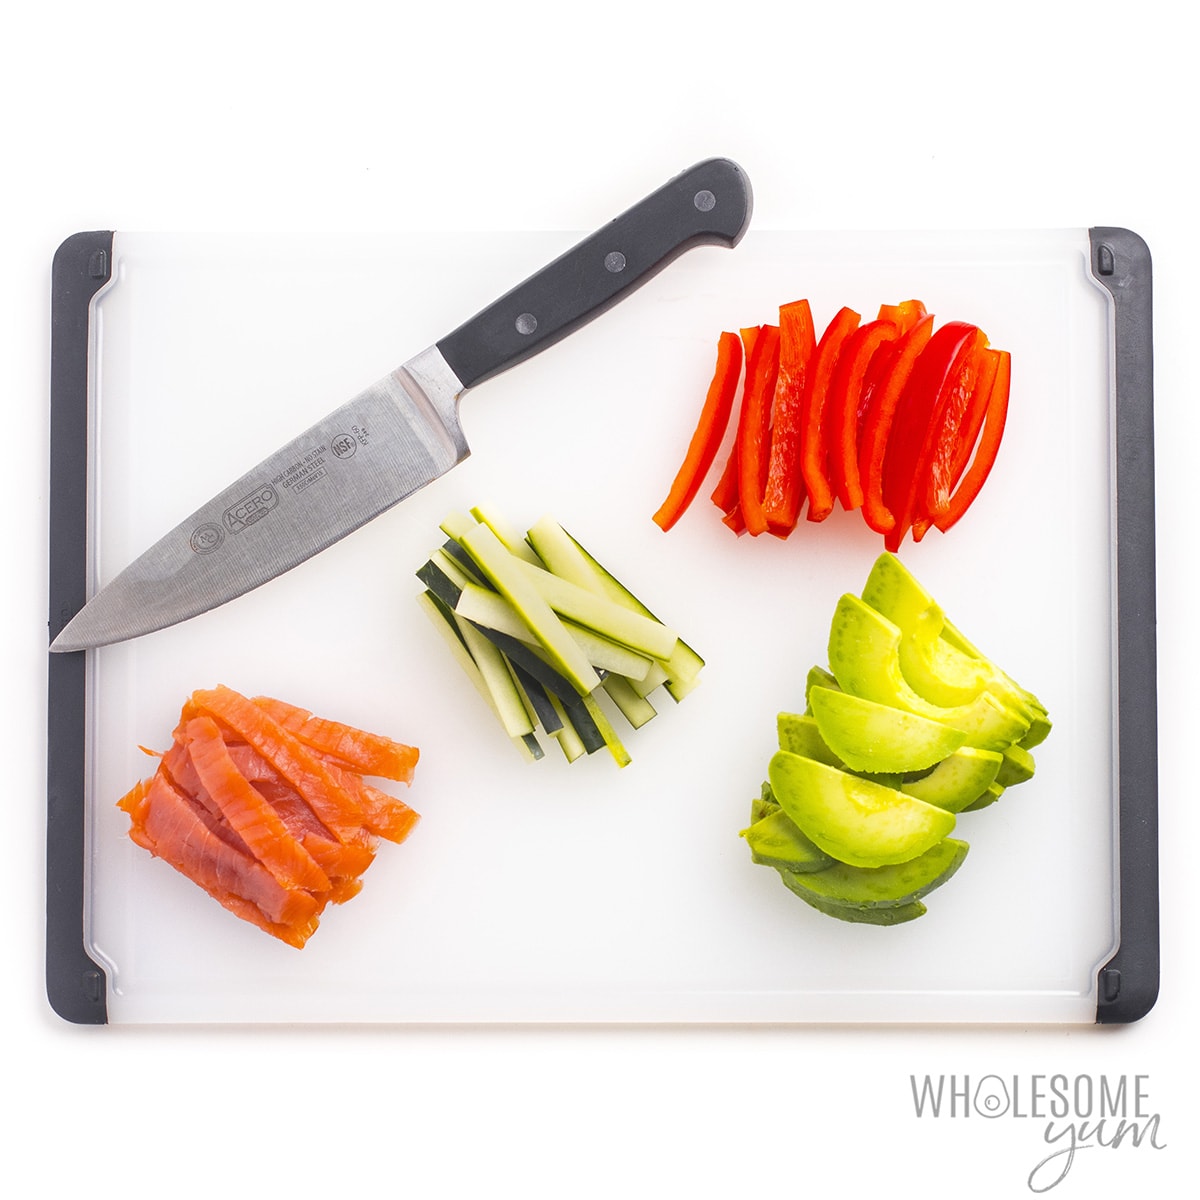 Chopped vegetables on a cutting board.